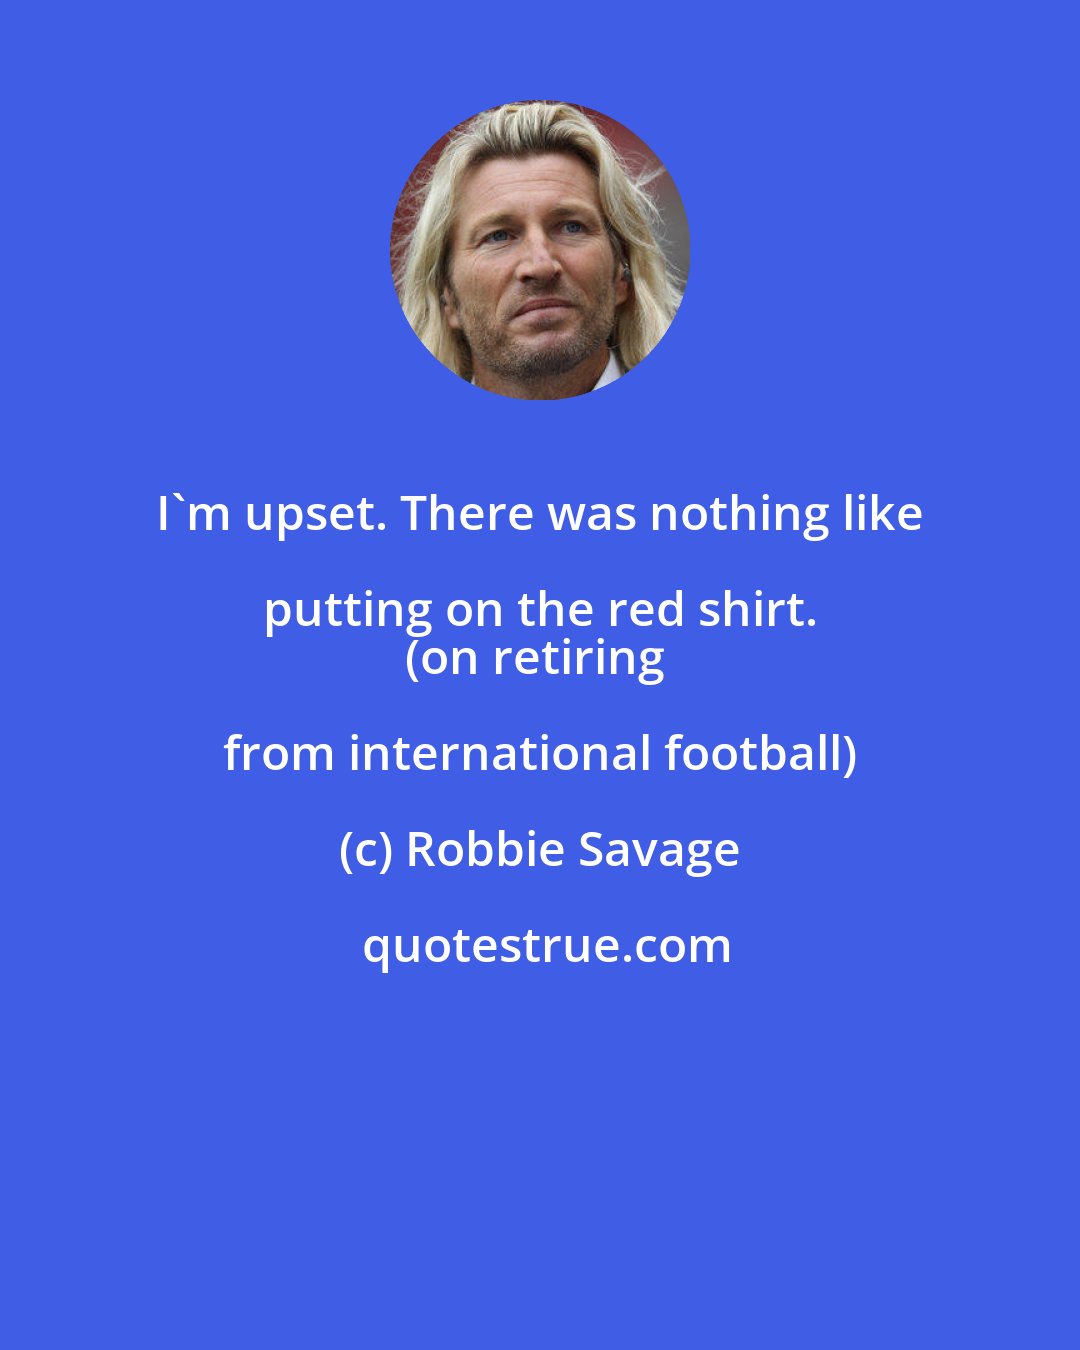 Robbie Savage: I'm upset. There was nothing like putting on the red shirt. 
(on retiring from international football)